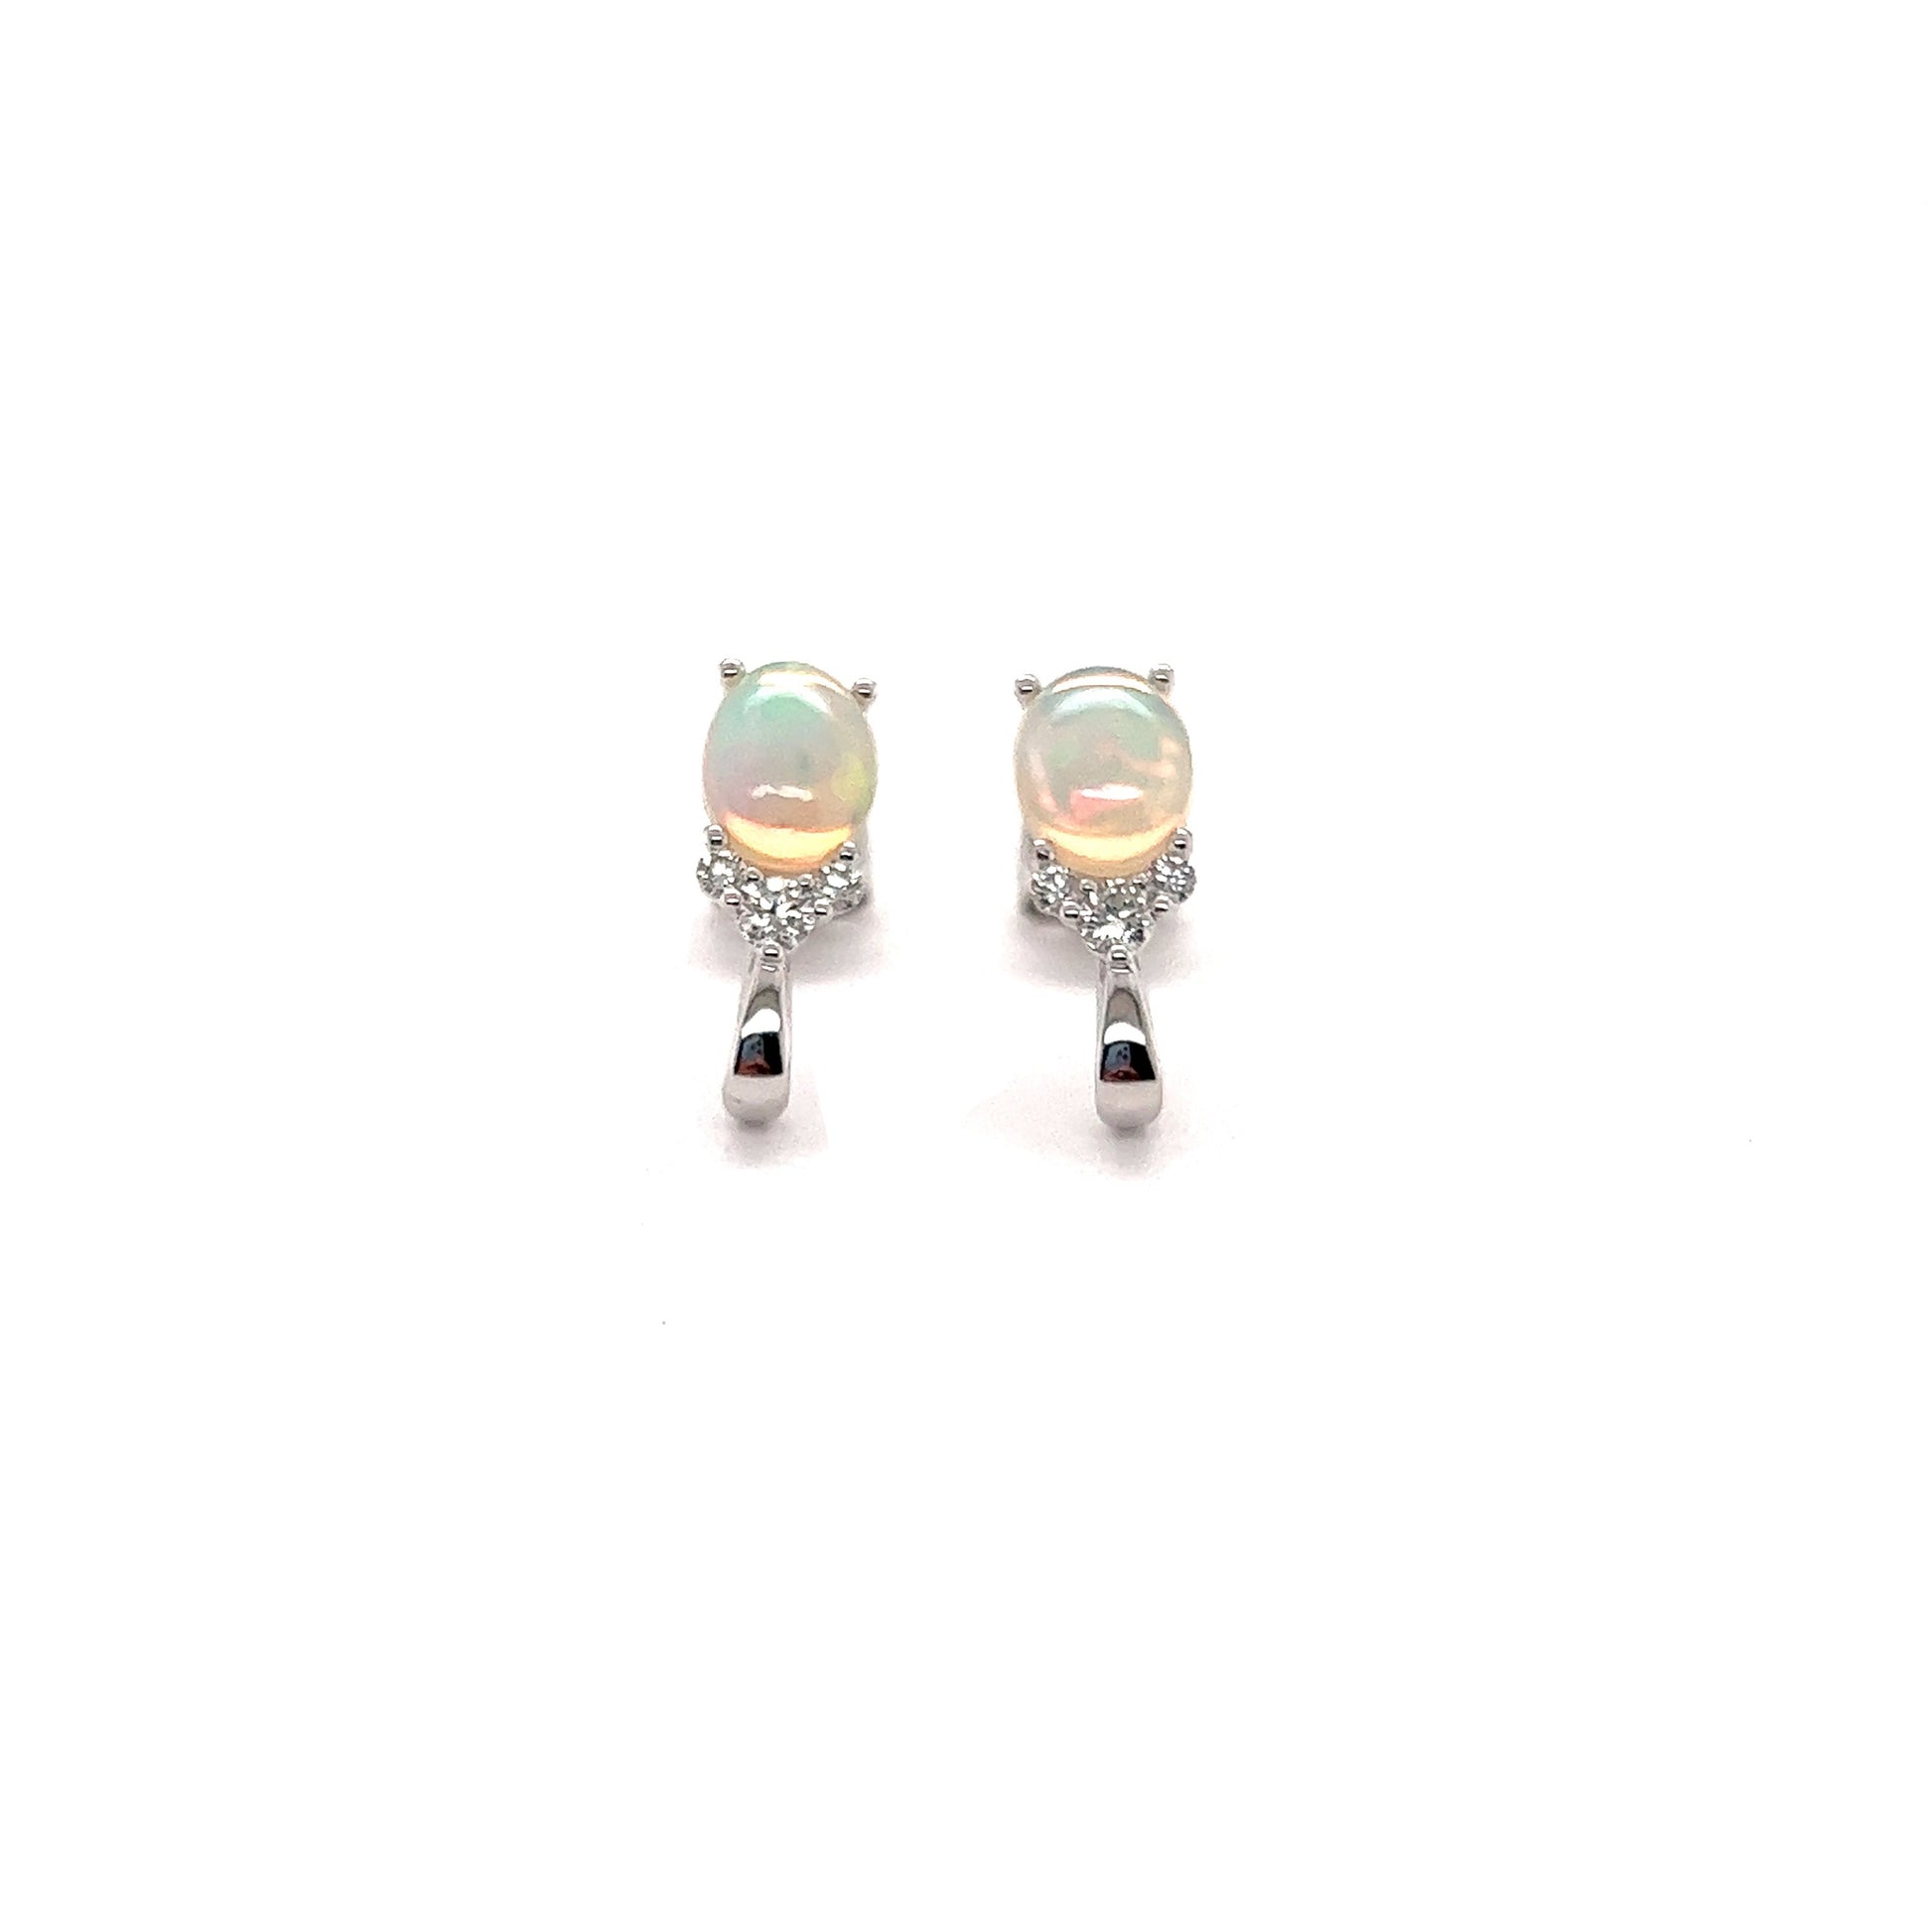 White Ethiopian Opal Stud Earrings with Accent Diamonds in 14K White Gold Front View Alternative